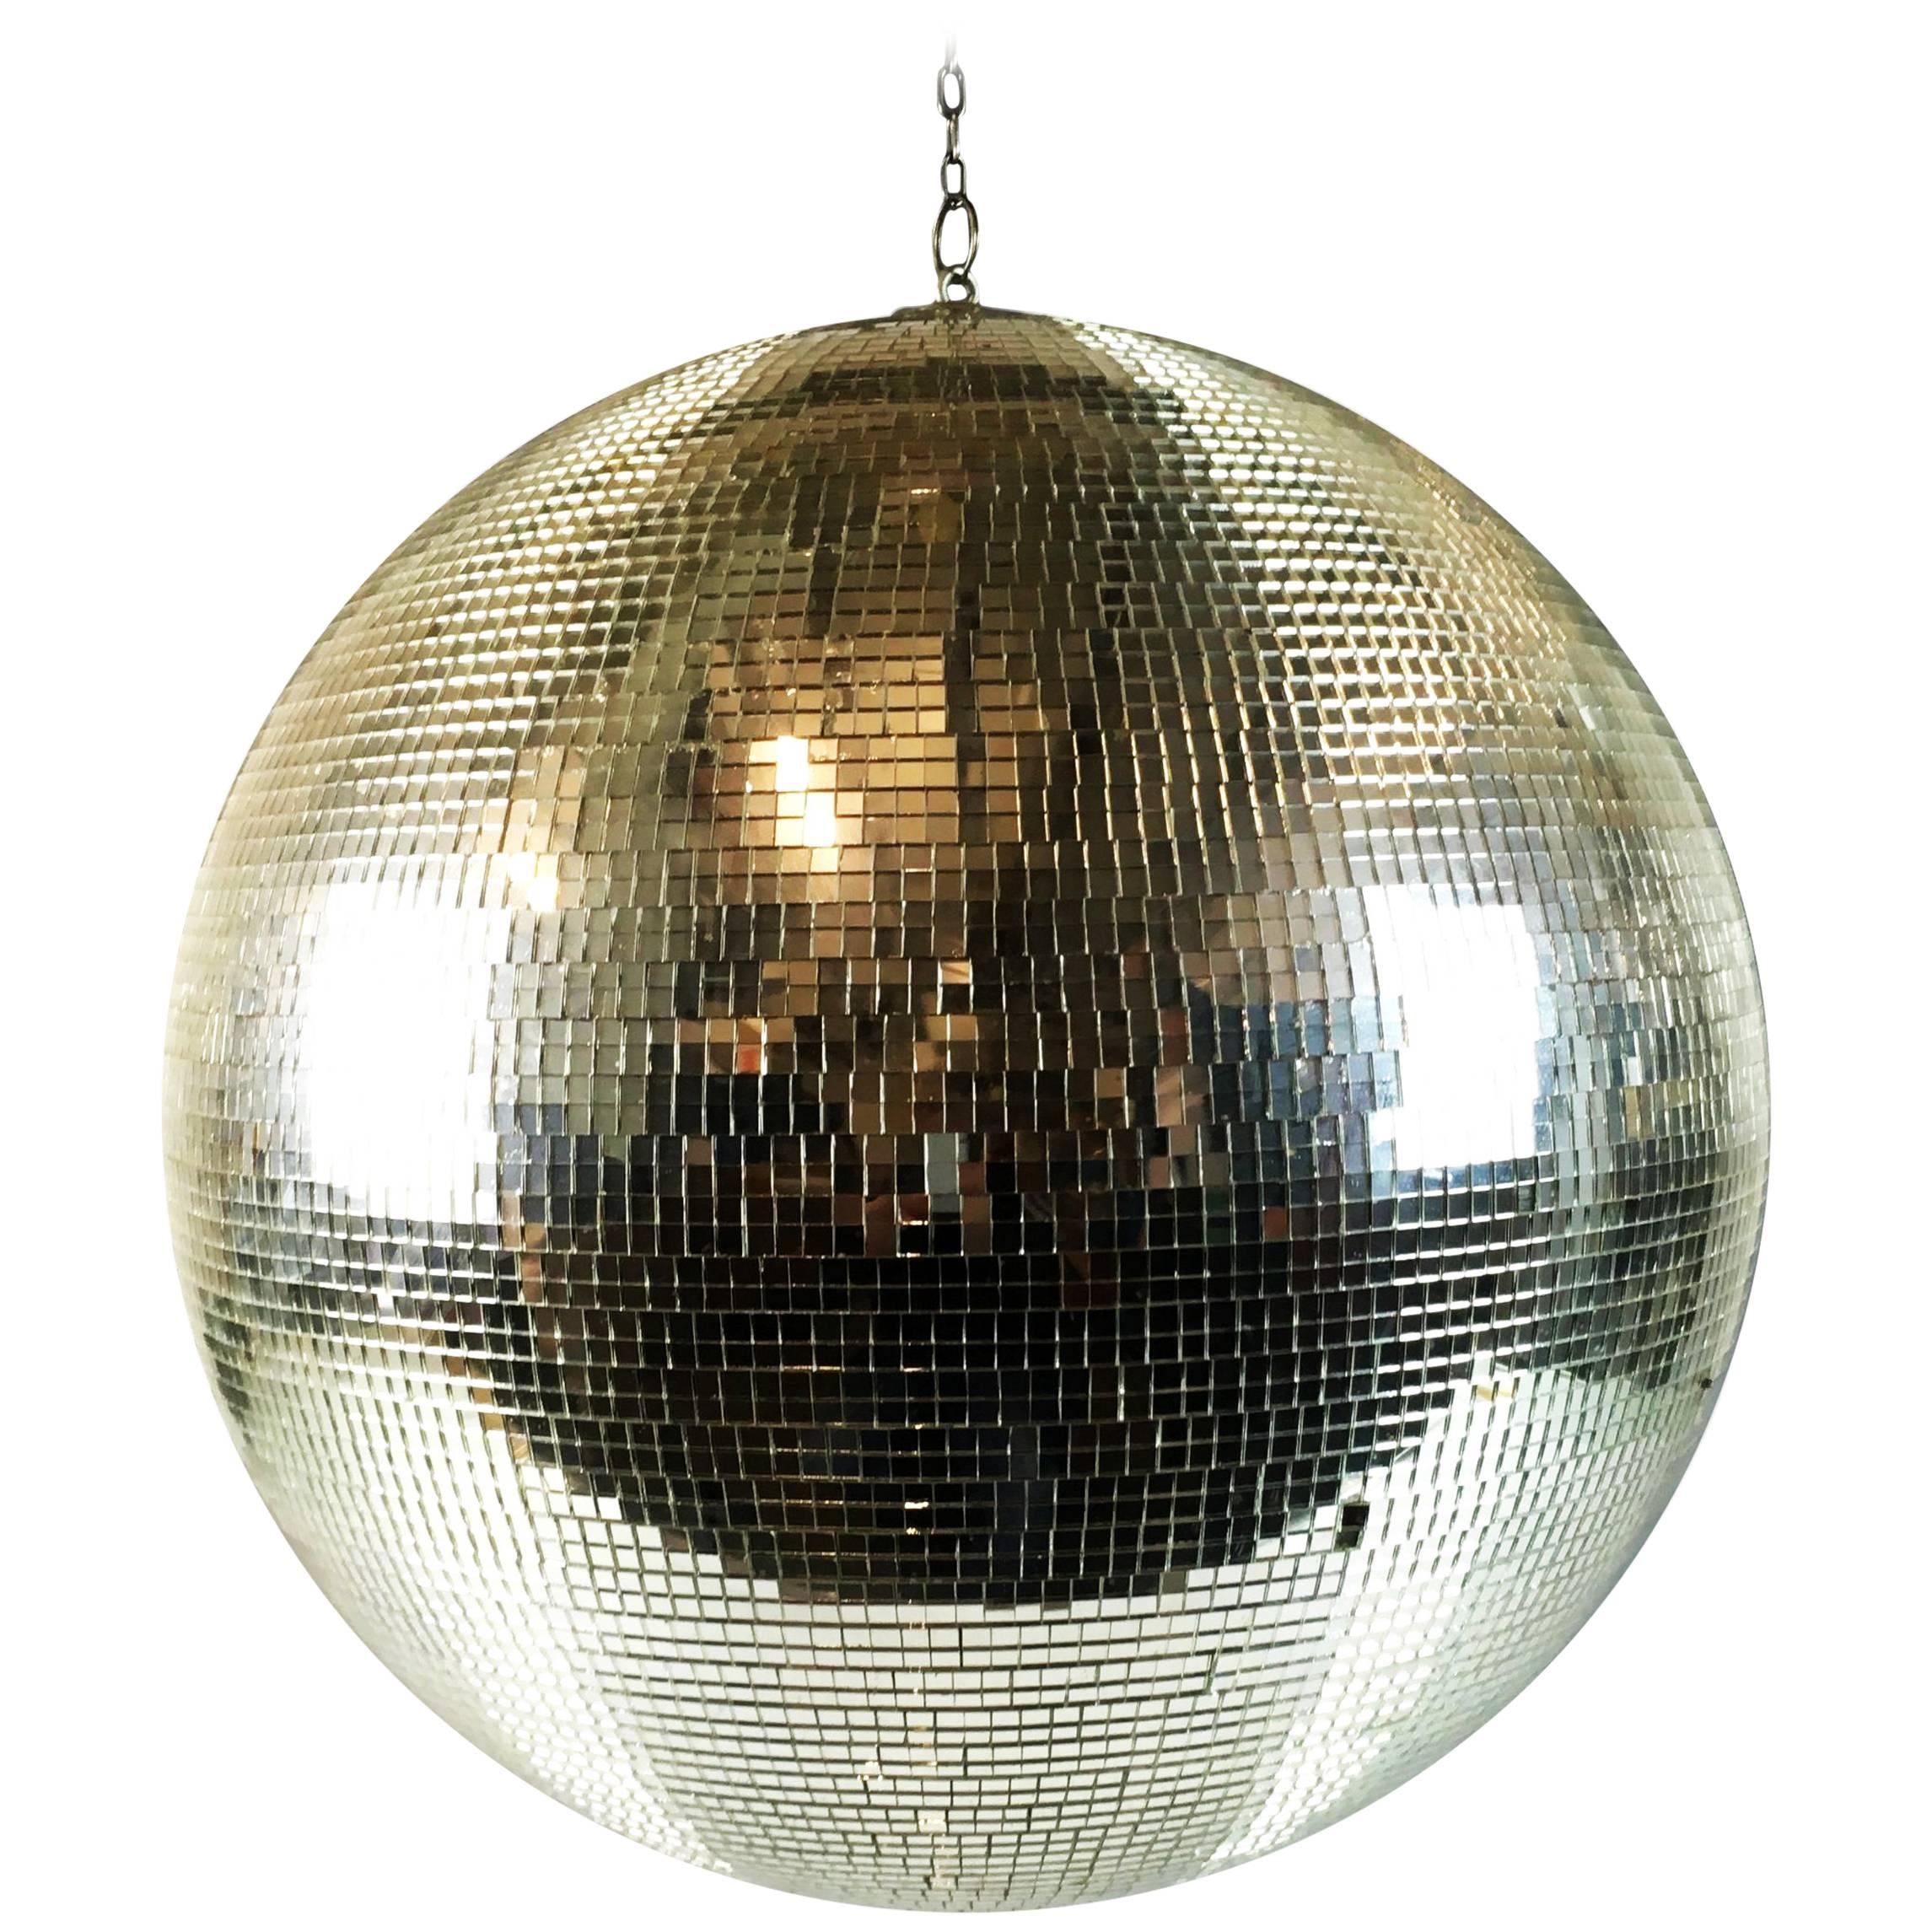 German Disco Ball from the 1970s